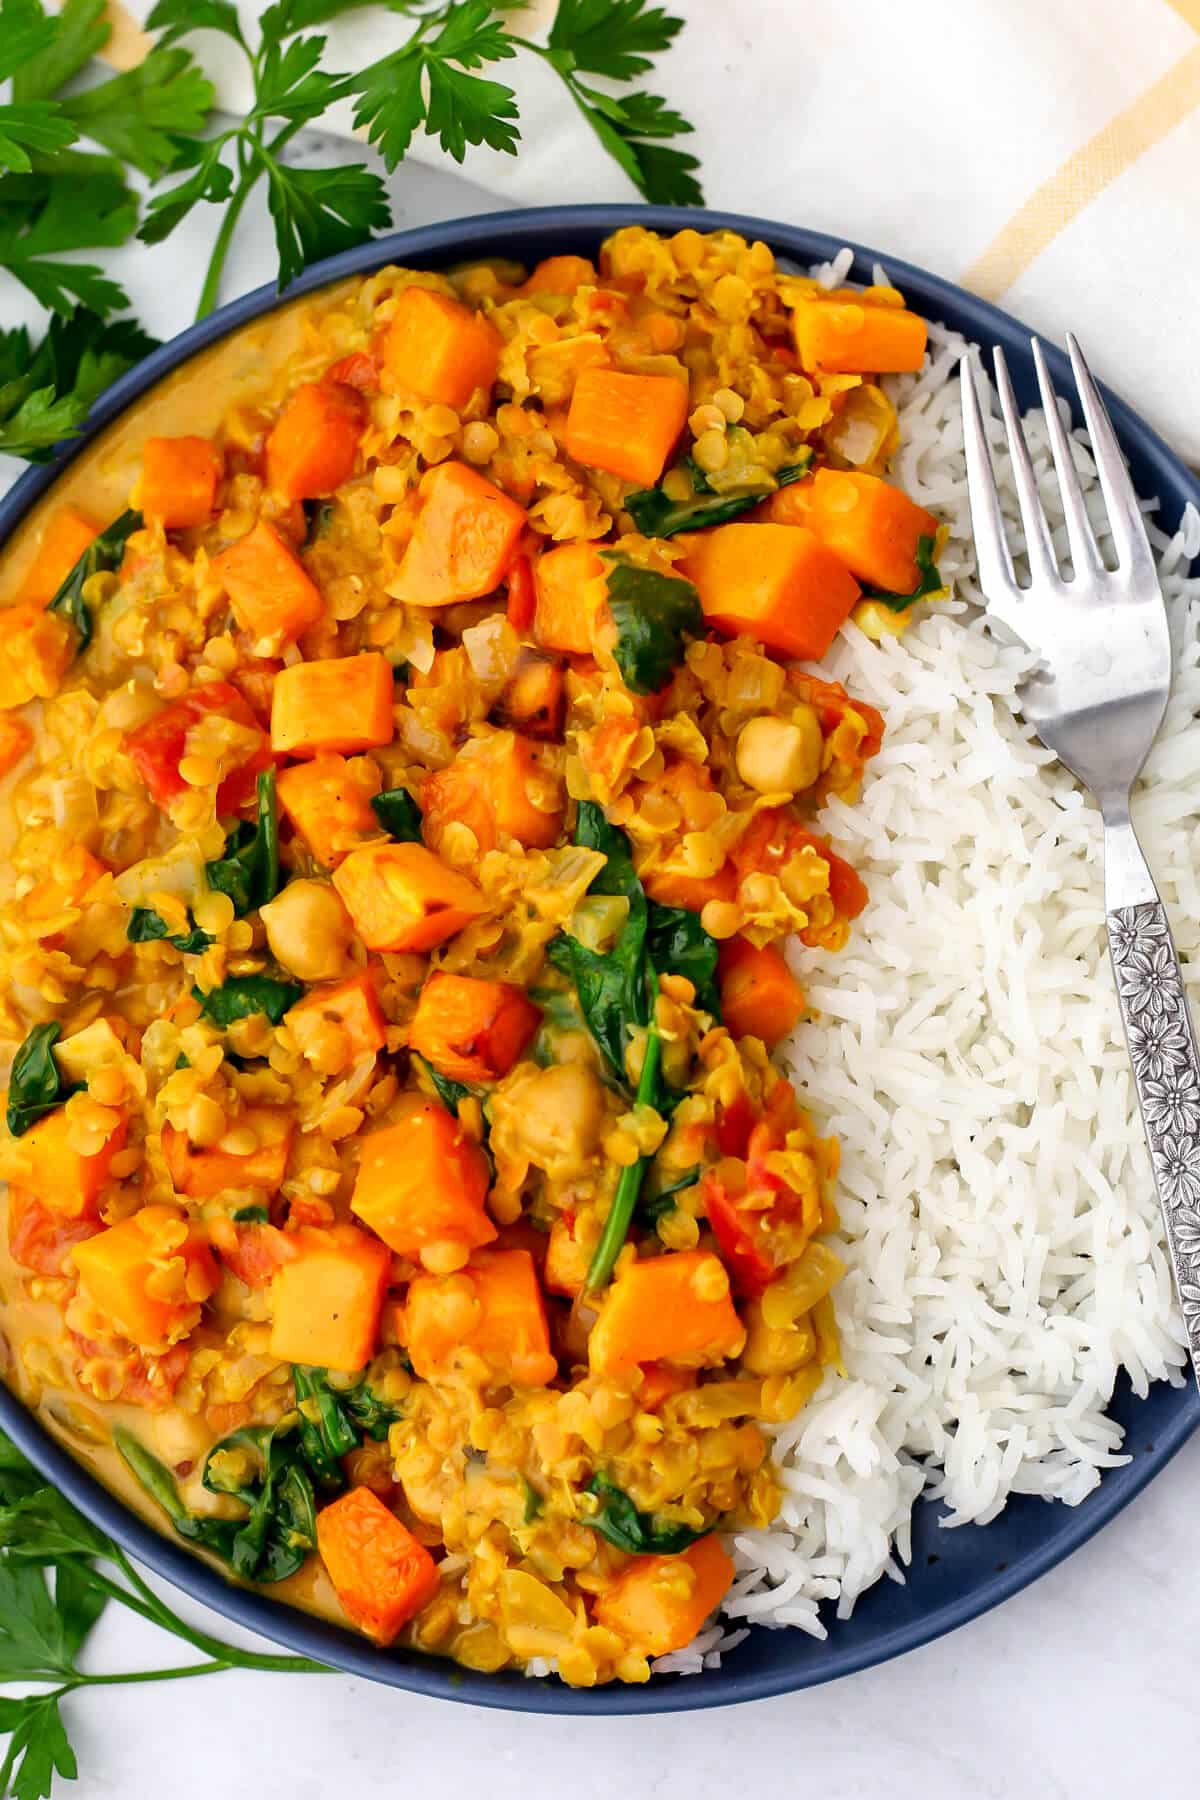 A top view of a blue plate filled with white rice and butternut squash and chickpea curry with red lentils and spinach.